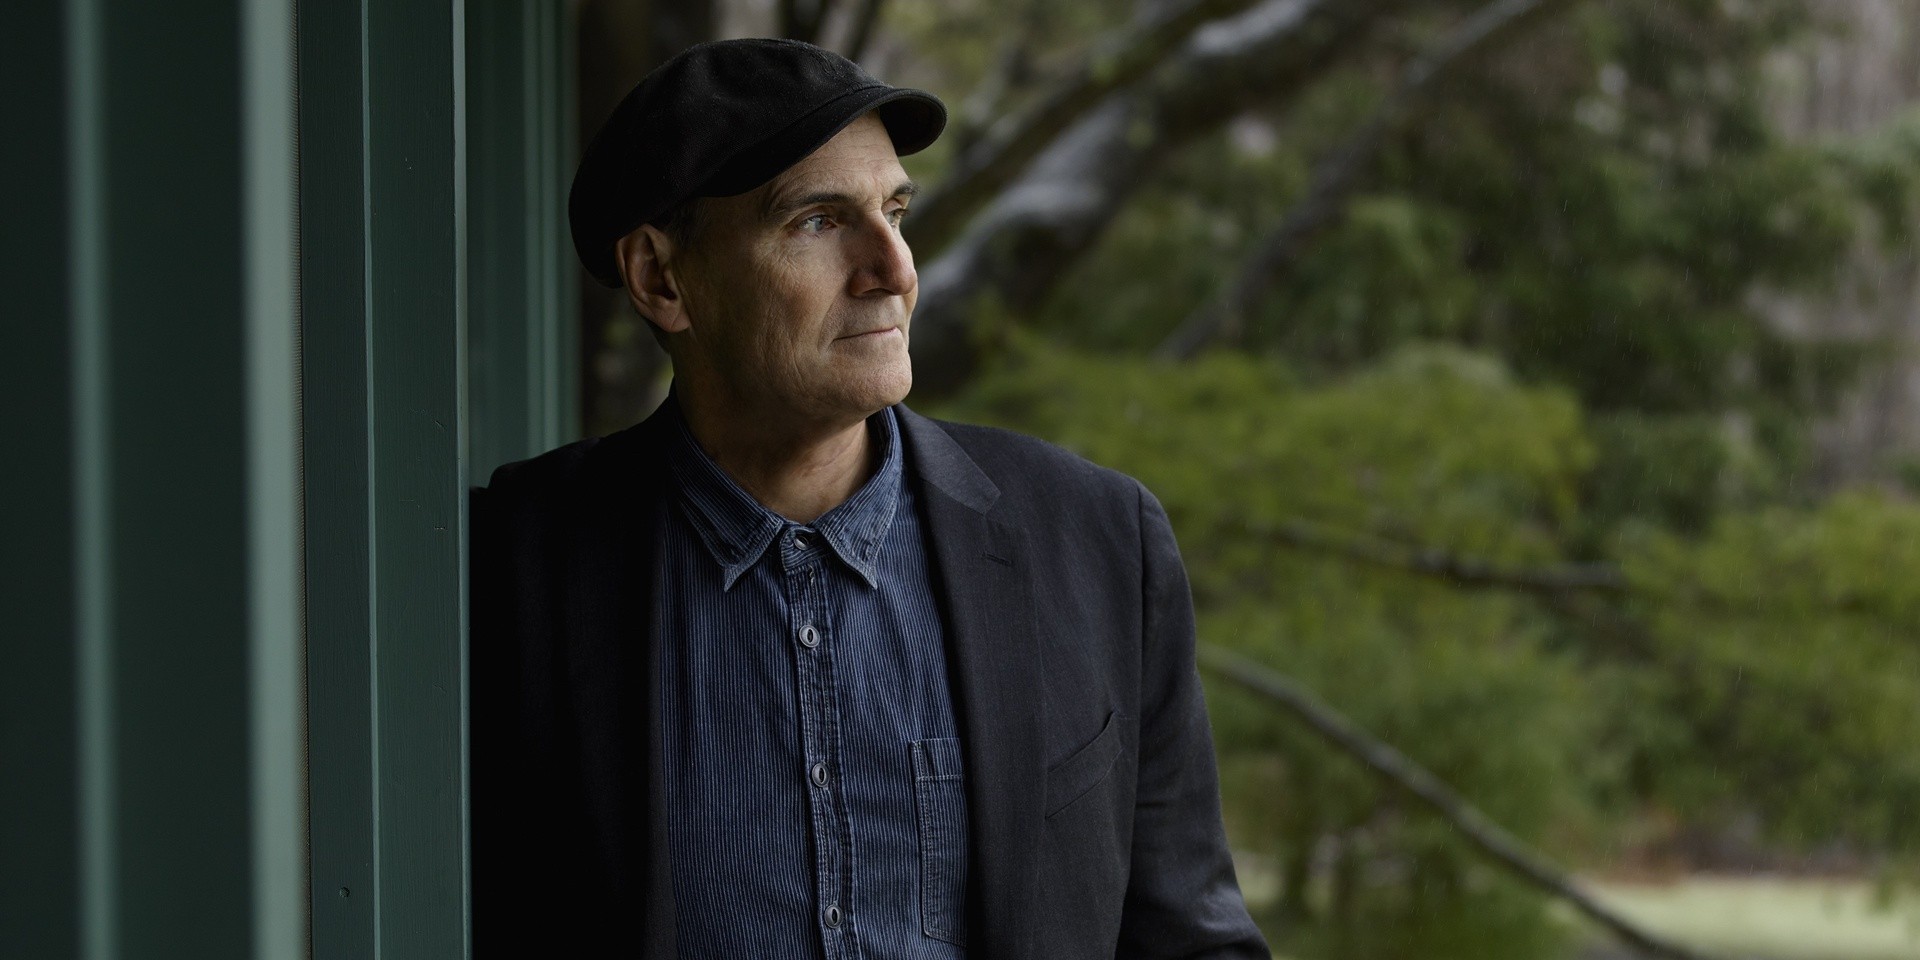 Legendary singer-songwriter James Taylor to perform in Singapore